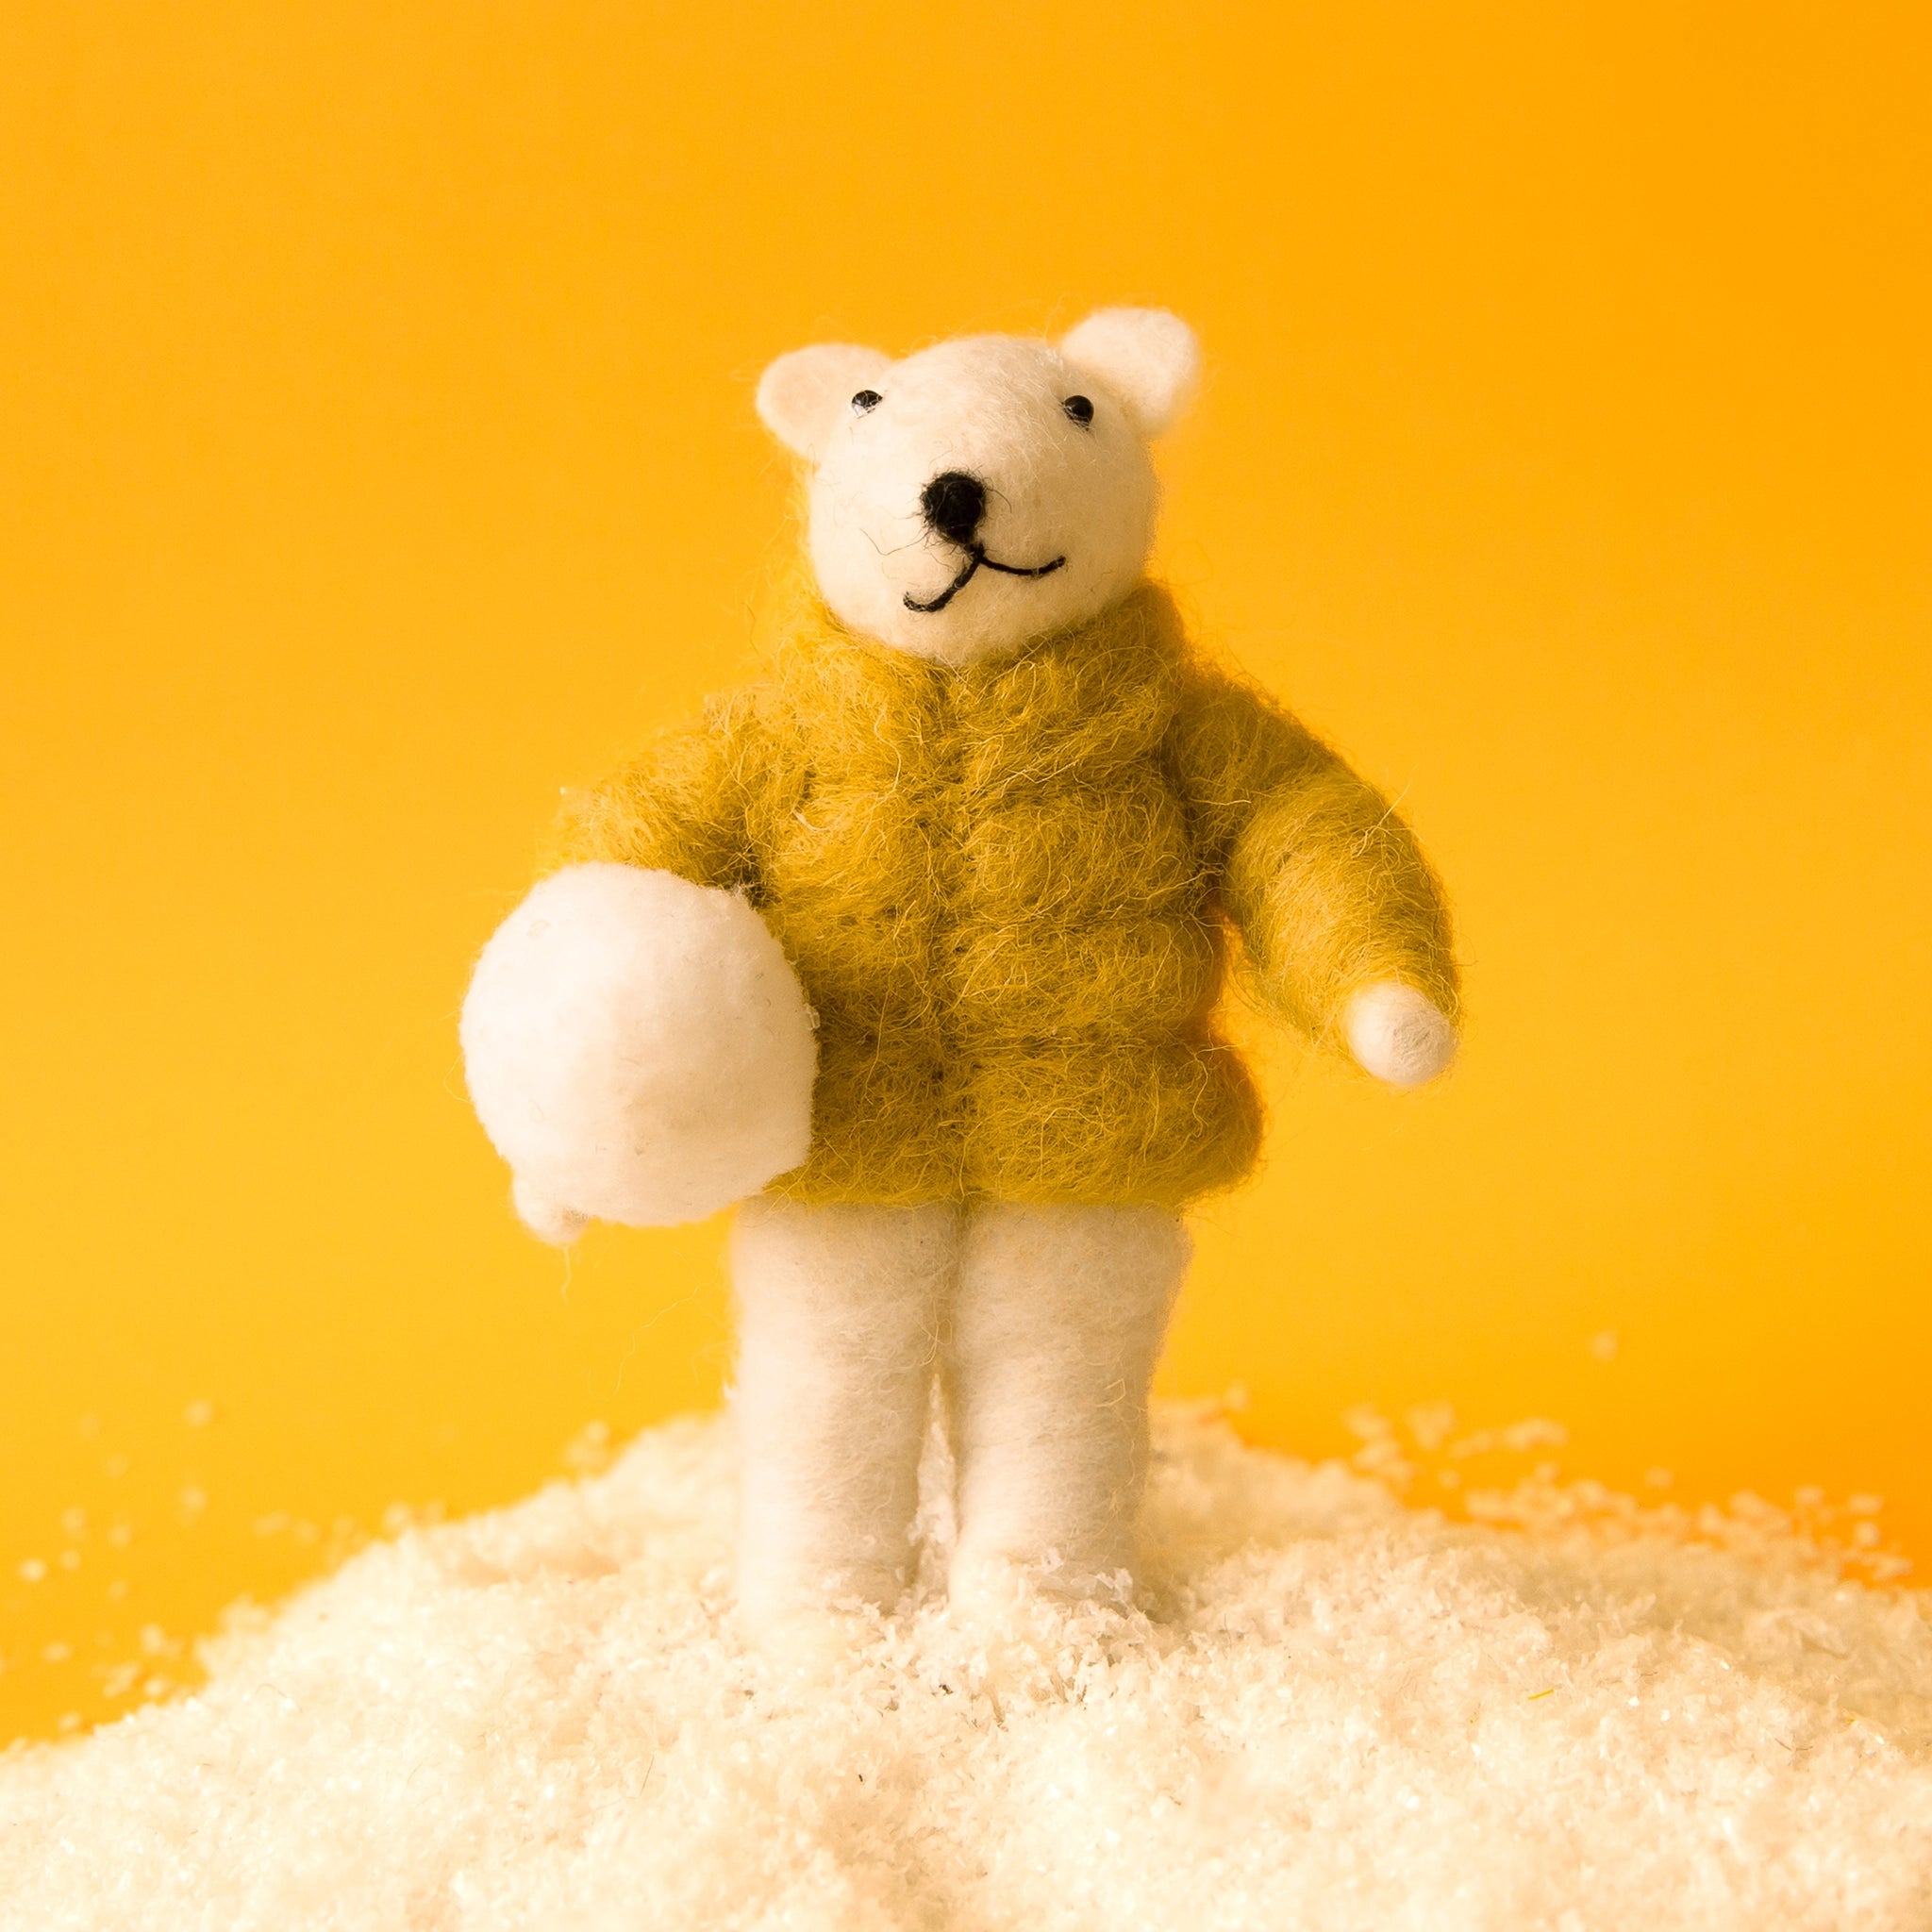 On a yellow background is a white felt bear ornament holding a snowball and wearing a yellow jacket. 